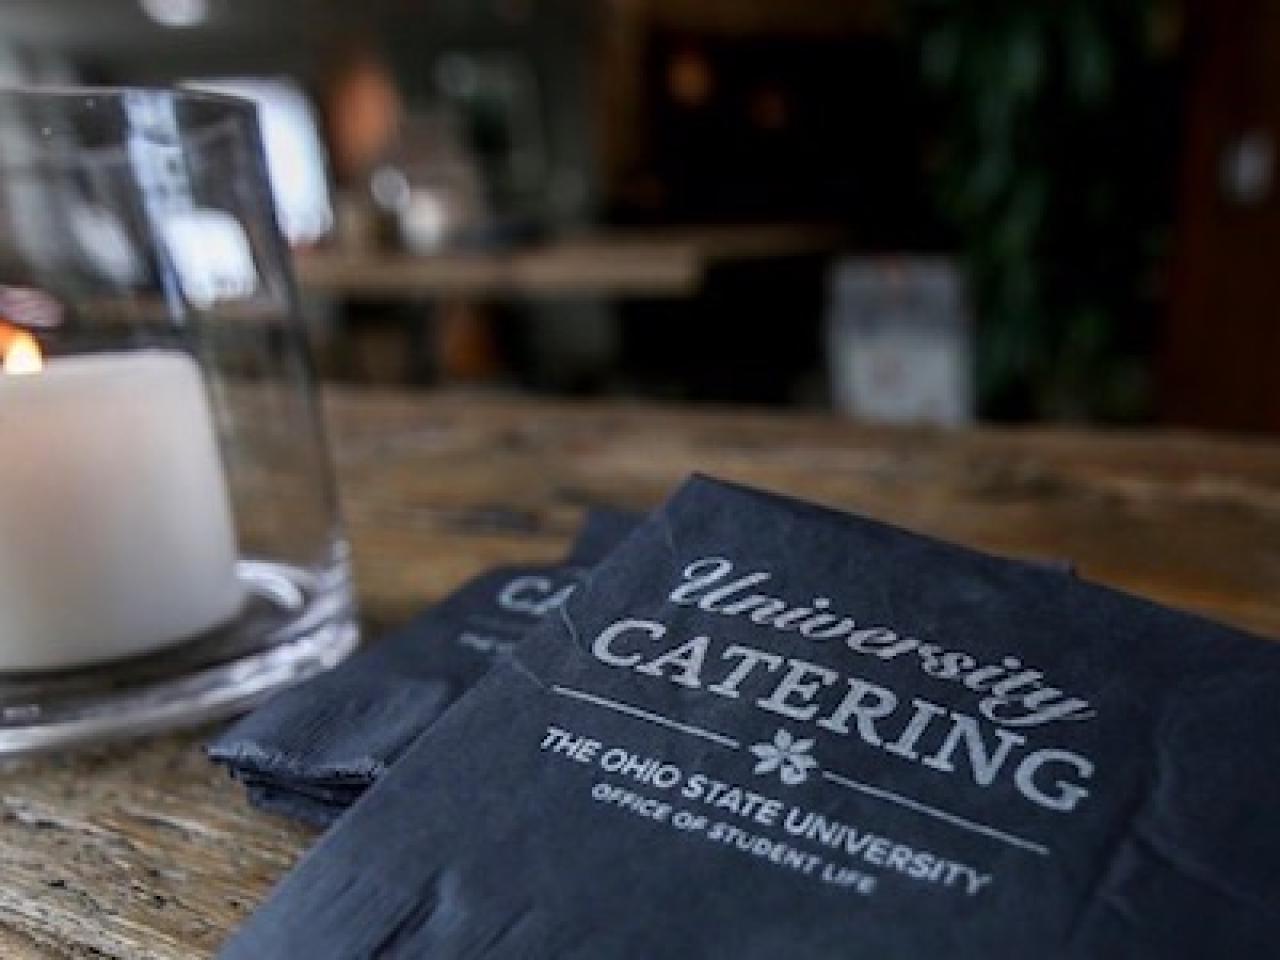 Menu that states University Catering next to a candle holder with a lit candle